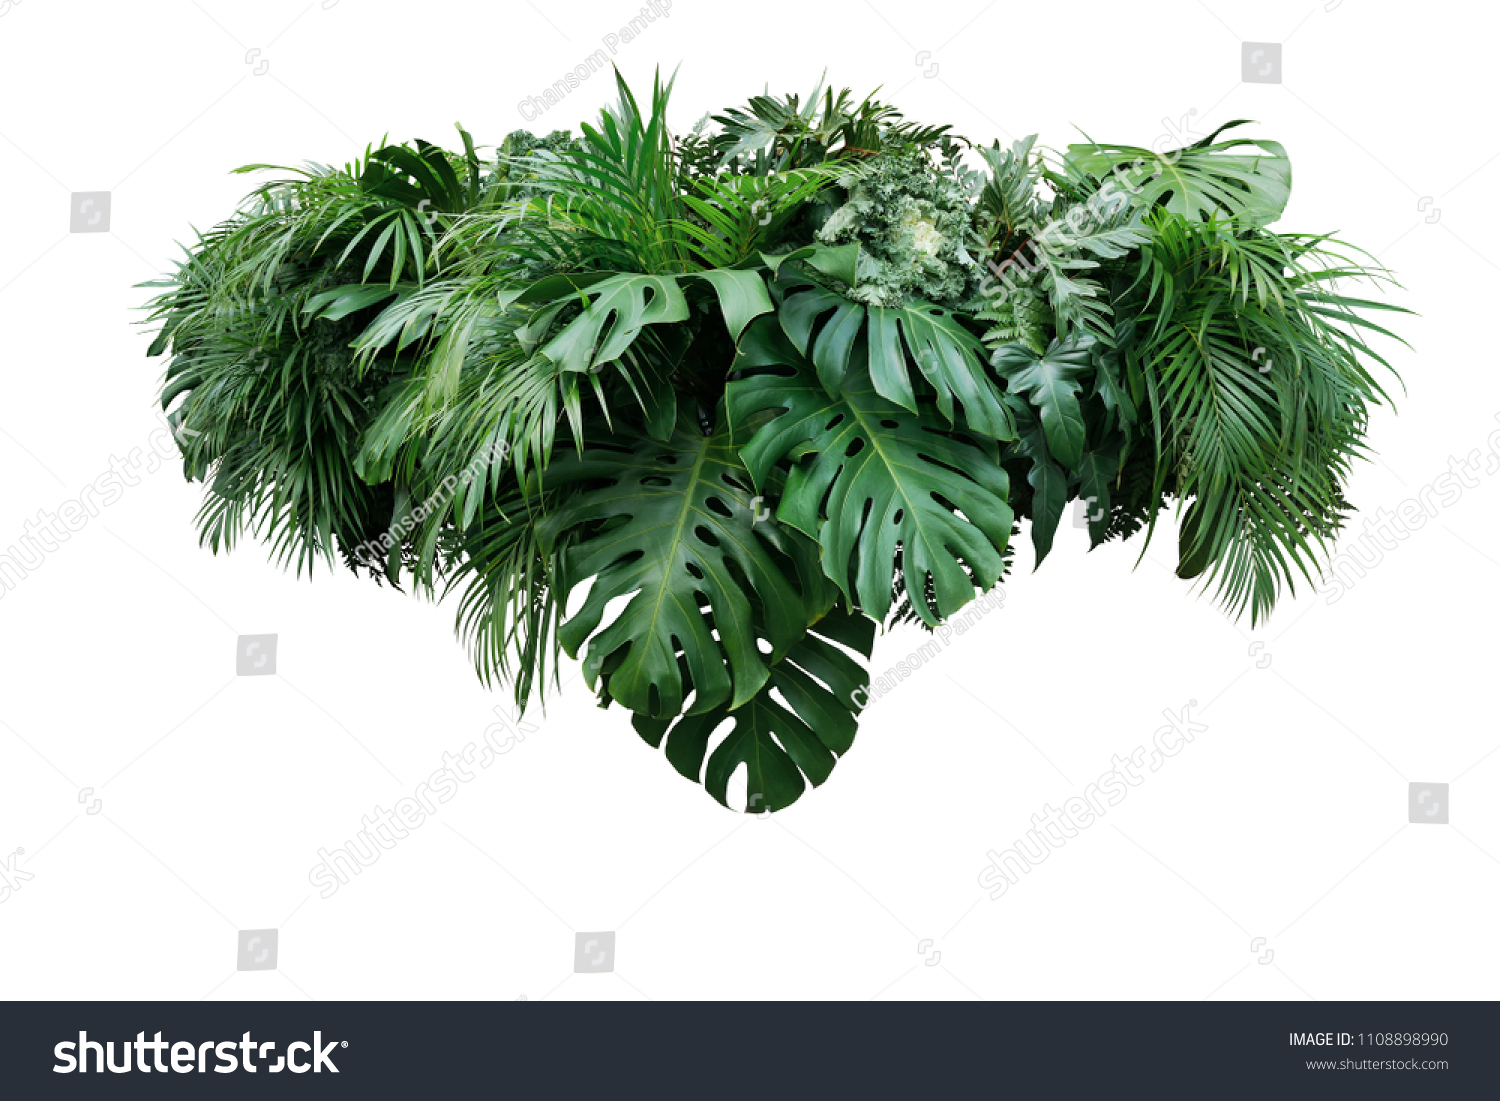 Tropical leaves foliage plant jungle bush floral arrangement nature backdrop isolated on white background, clipping path included. #1108898990